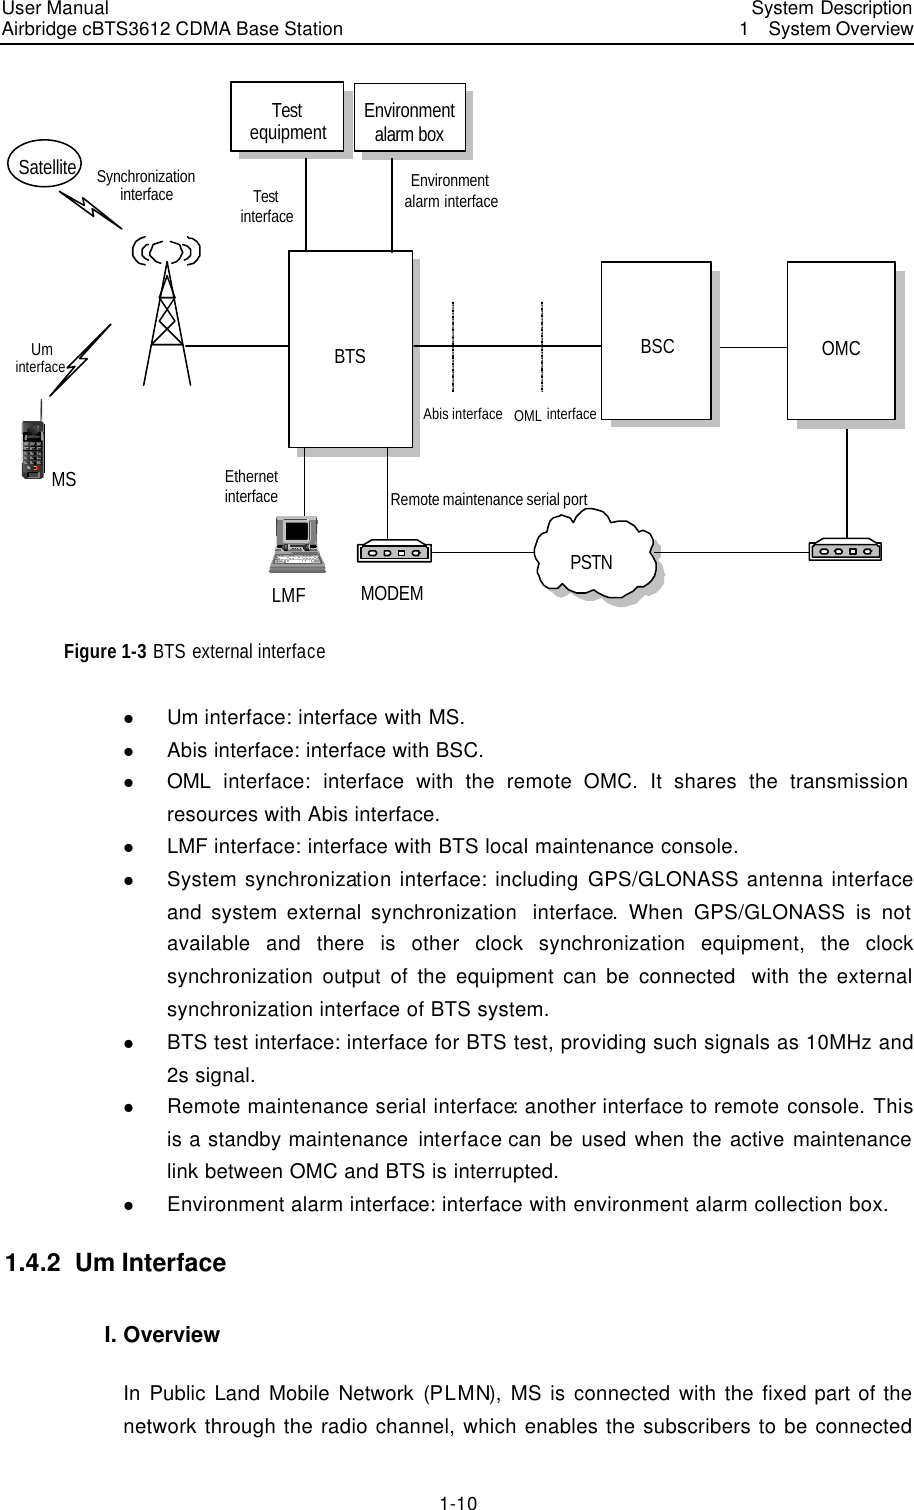 User Manual Airbridge cBTS3612 CDMA Base Station   System Description1  System Overview 1-10 BTSAbis interfaceUm interfaceMSSatellite  Synchronization interfaceOML interfaceTest interfaceEthernet interface Remote maintenance serial portPSTNEnvironment alarm interfaceEnvironment alarm boxBSC OMCLMF MODEMTest equipment Figure 1-3 BTS external interface l Um interface: interface with MS. l Abis interface: interface with BSC. l OML  interface:  interface with the remote OMC. It shares the transmission resources with Abis interface. l LMF interface: interface with BTS local maintenance console. l System synchronization interface: including GPS/GLONASS antenna interface and system external synchronization  interface. When GPS/GLONASS is not available and there is other clock synchronization equipment, the clock synchronization output of the equipment can be connected  with the external synchronization interface of BTS system. l BTS test interface: interface for BTS test, providing such signals as 10MHz and 2s signal. l Remote maintenance serial interface: another interface to remote console. This is a standby maintenance interface can be used when the active maintenance link between OMC and BTS is interrupted. l Environment alarm interface: interface with environment alarm collection box. 1.4.2  Um Interface I. Overview In Public Land Mobile Network (PLMN), MS is connected with the fixed part of the network through the radio channel, which enables the subscribers to be connected 